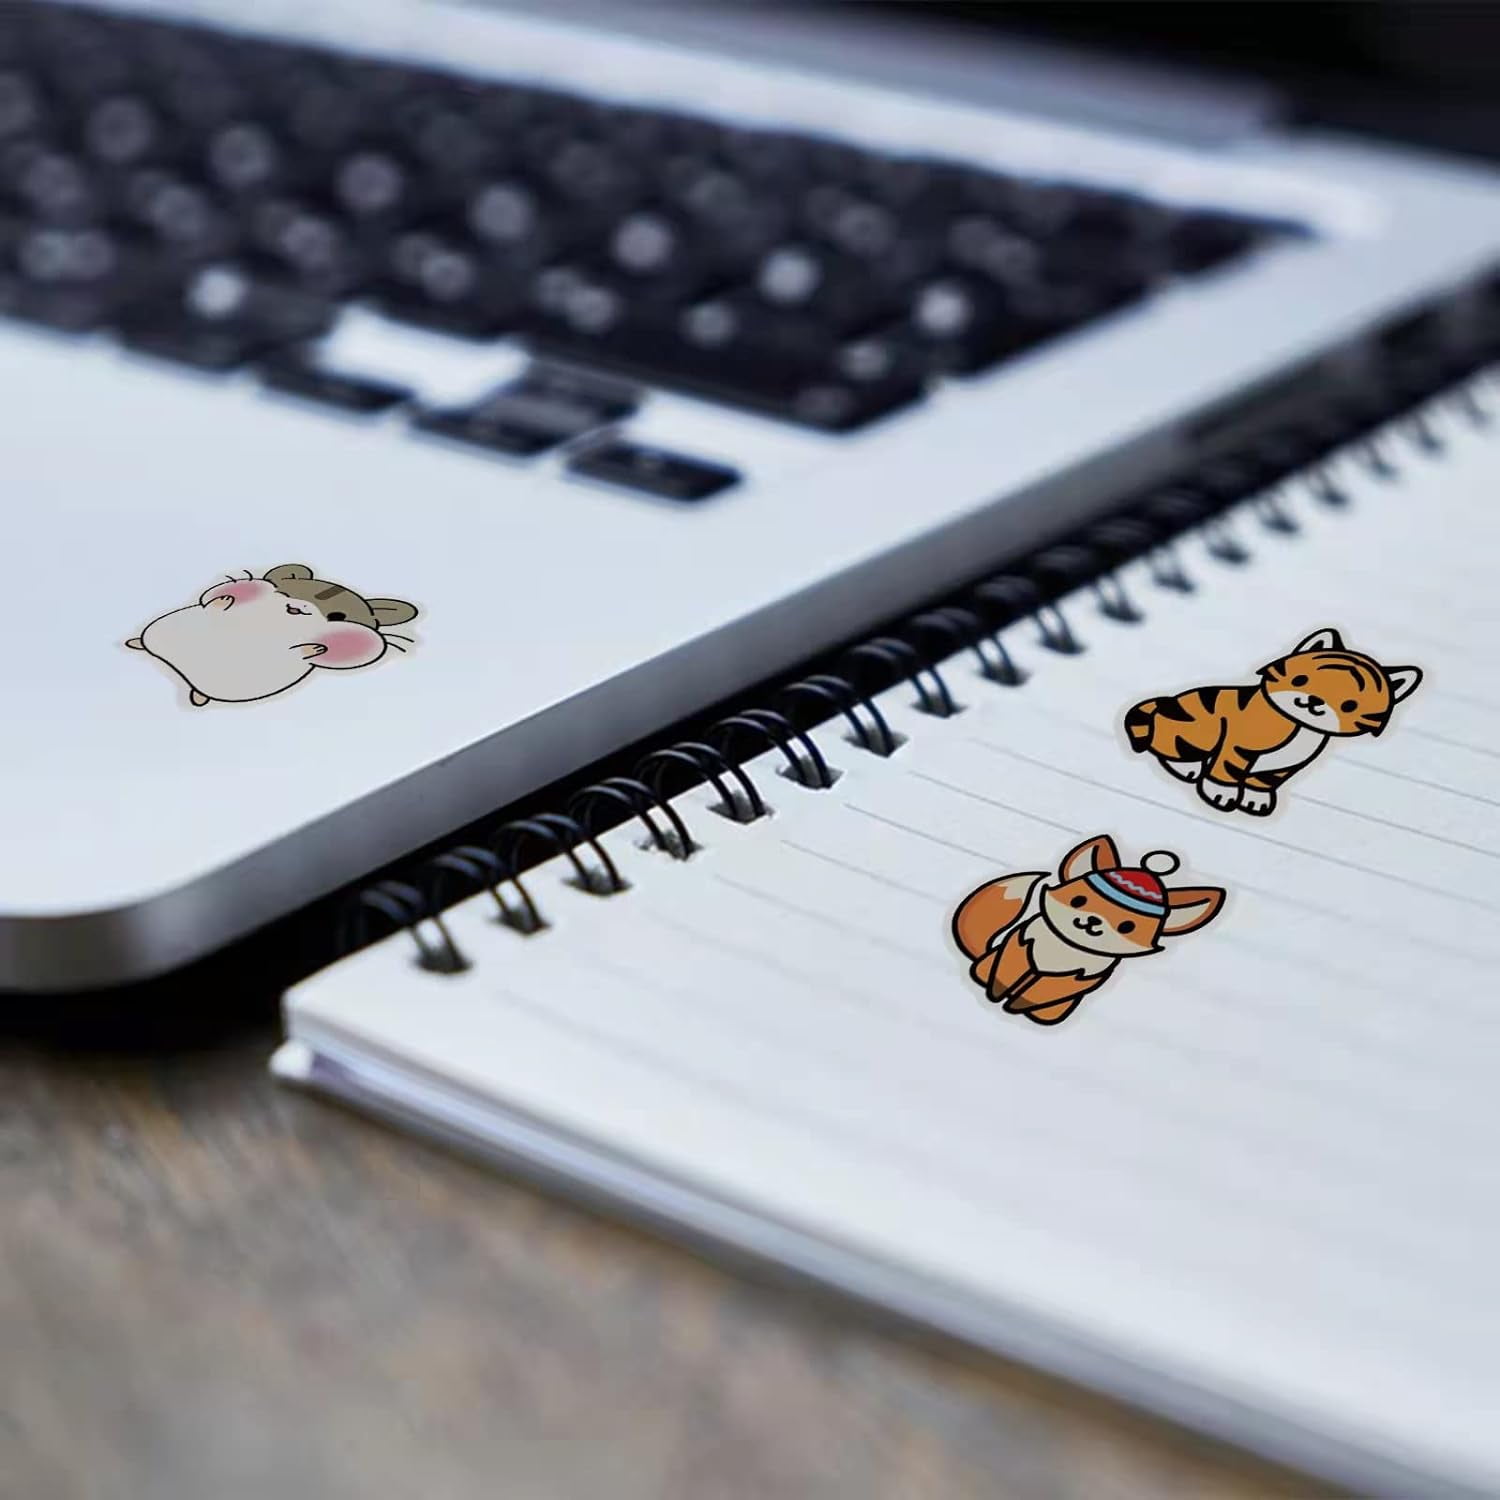 Animal 100 Picwaterproof Animal Stickers 100pcs - Cartoon Zoo Decals For  Laptop & Skateboard